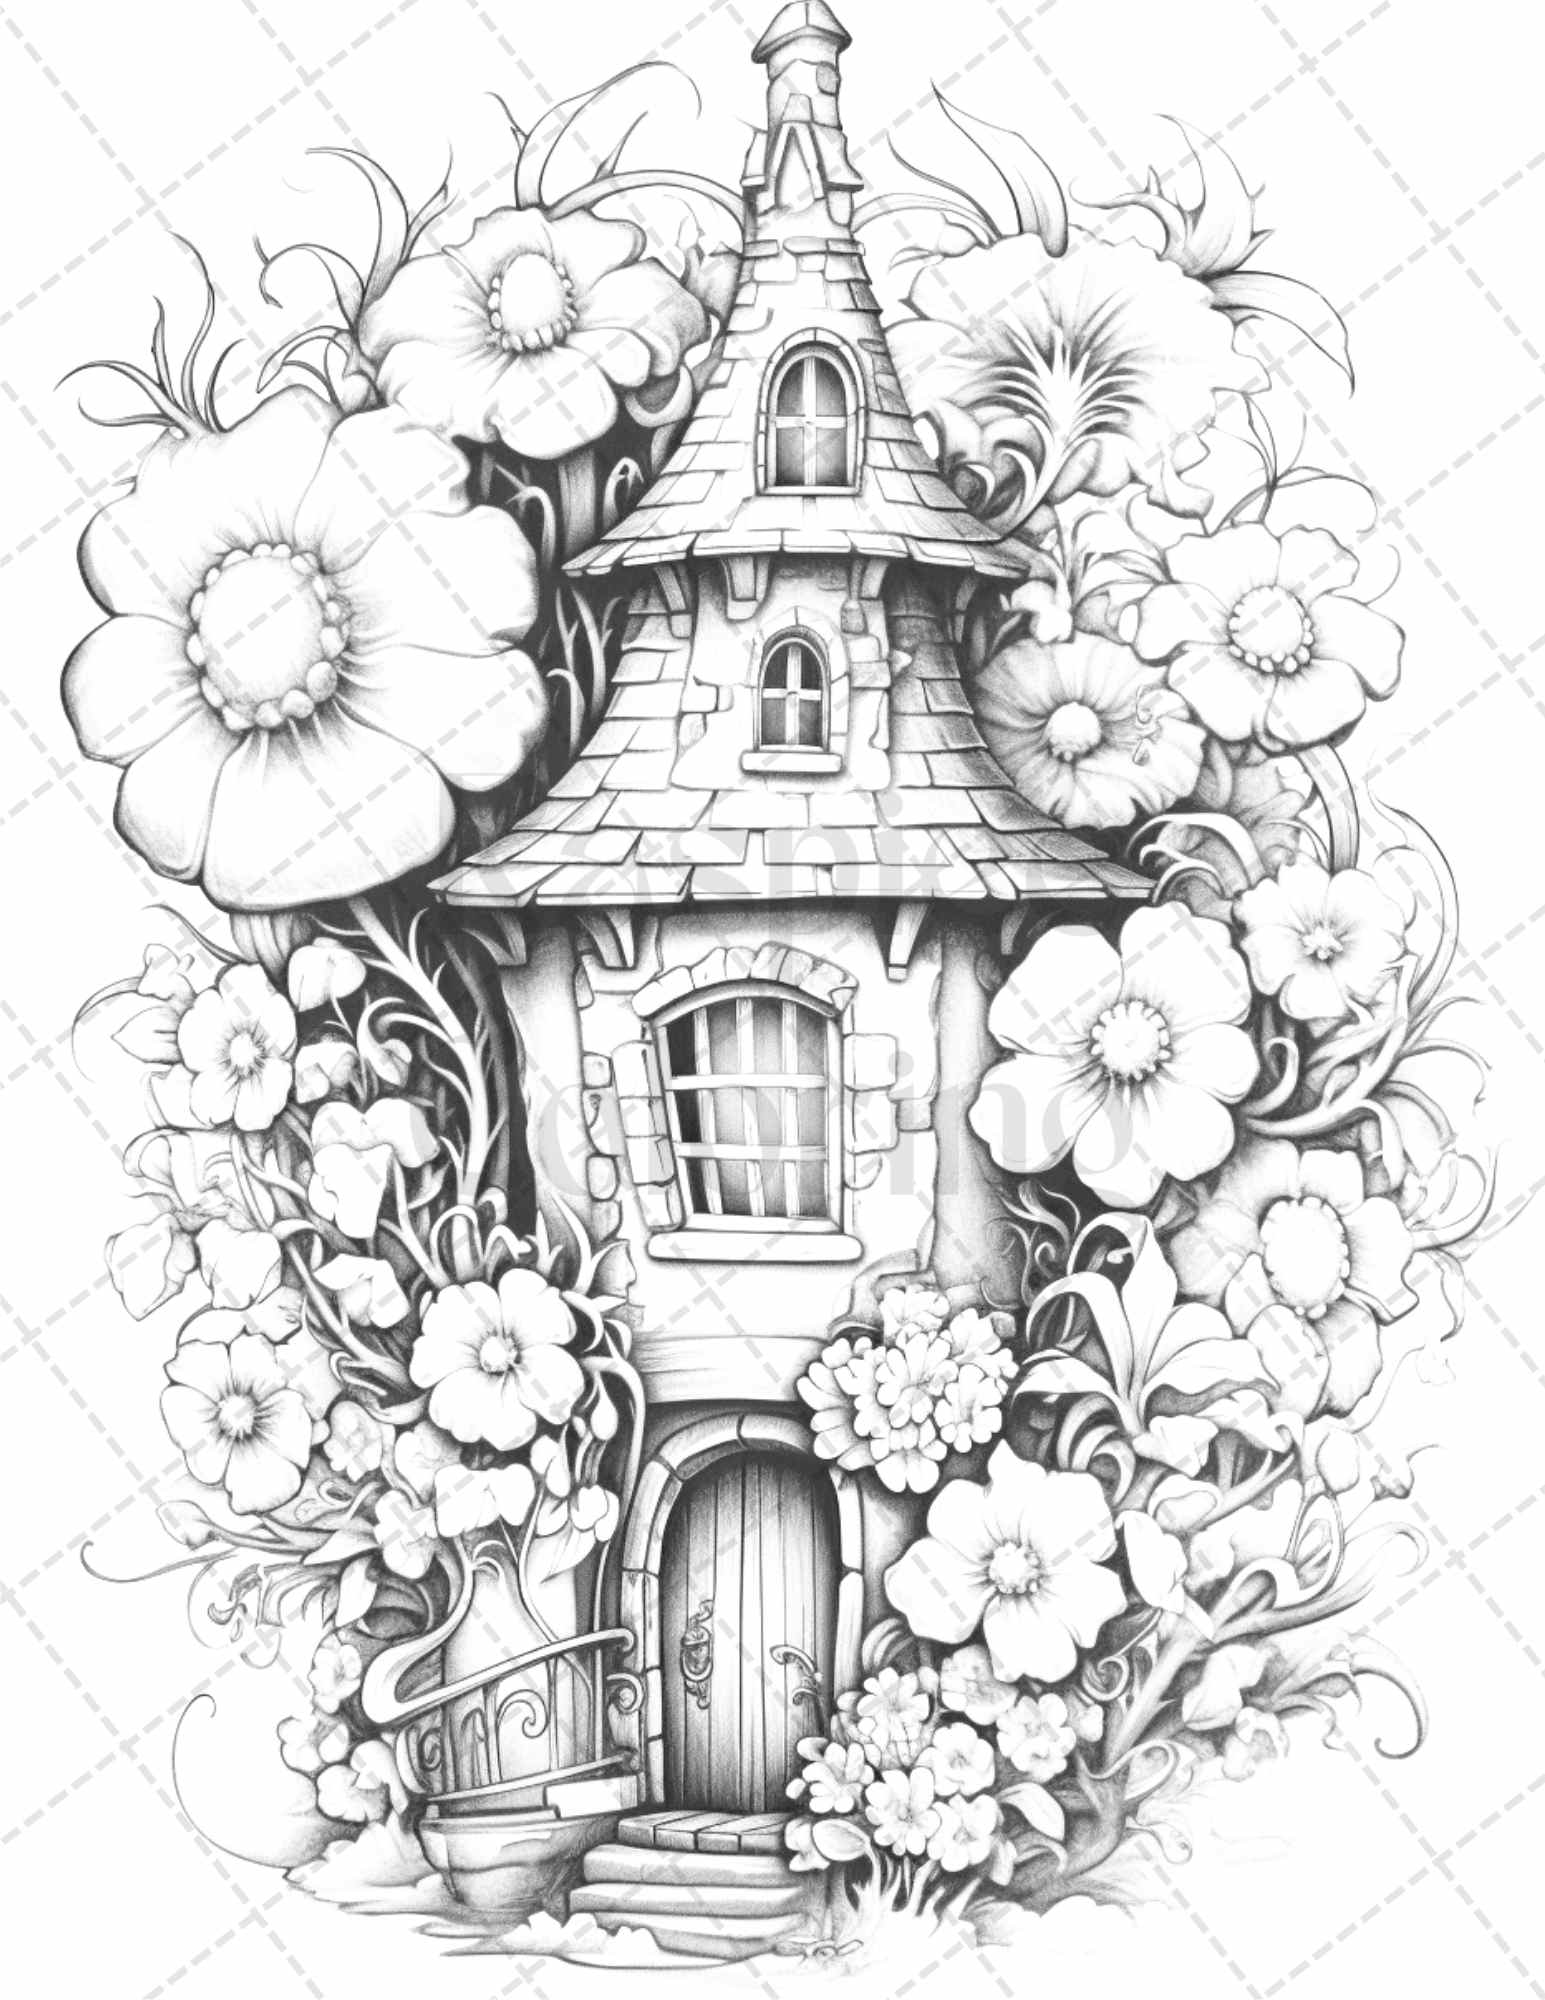 grayscale coloring pages, flower houses, printable for adults, adult coloring, floral coloring, stress relief, art therapy, home decor, wall art